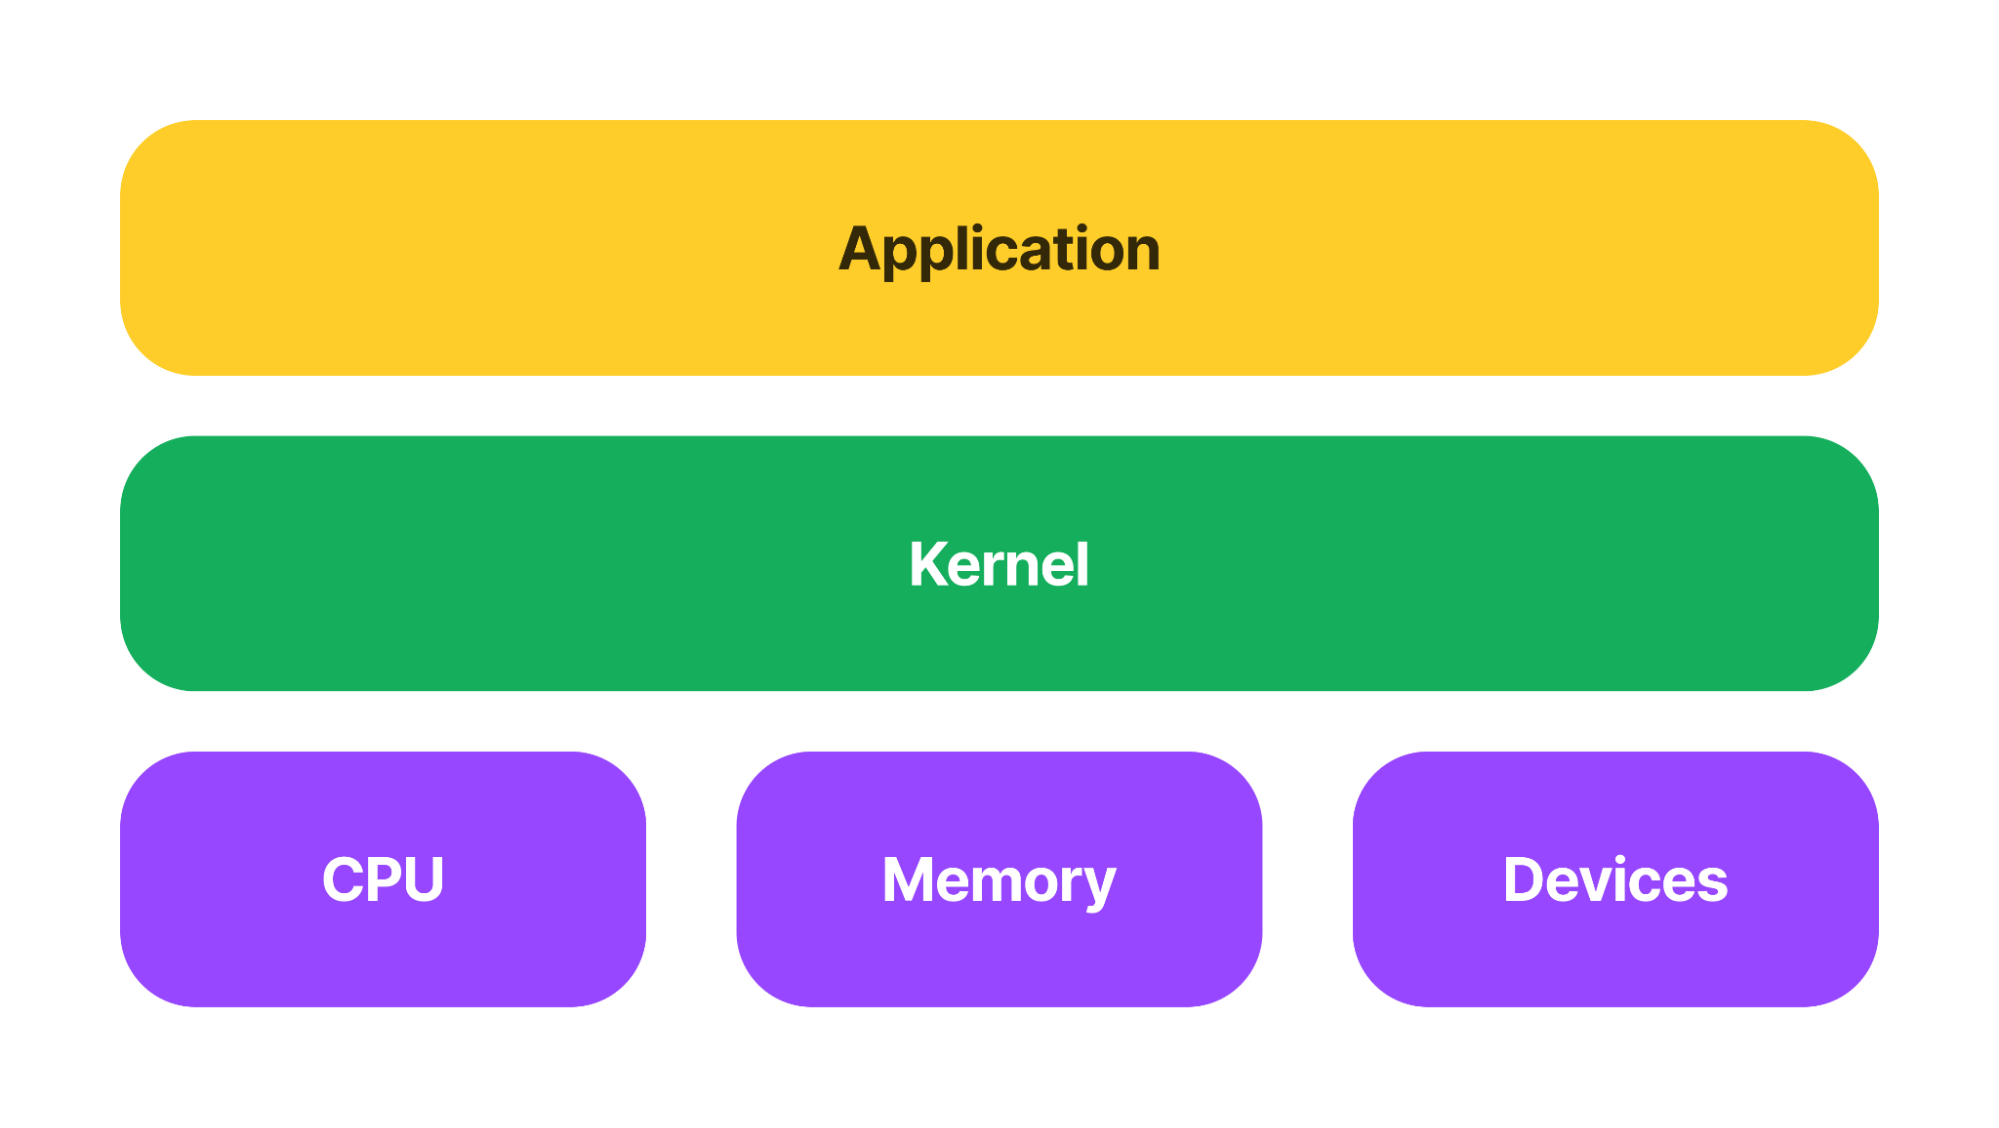 Application overview featuring Application, Kernel, and CPU, Memory, and Devices